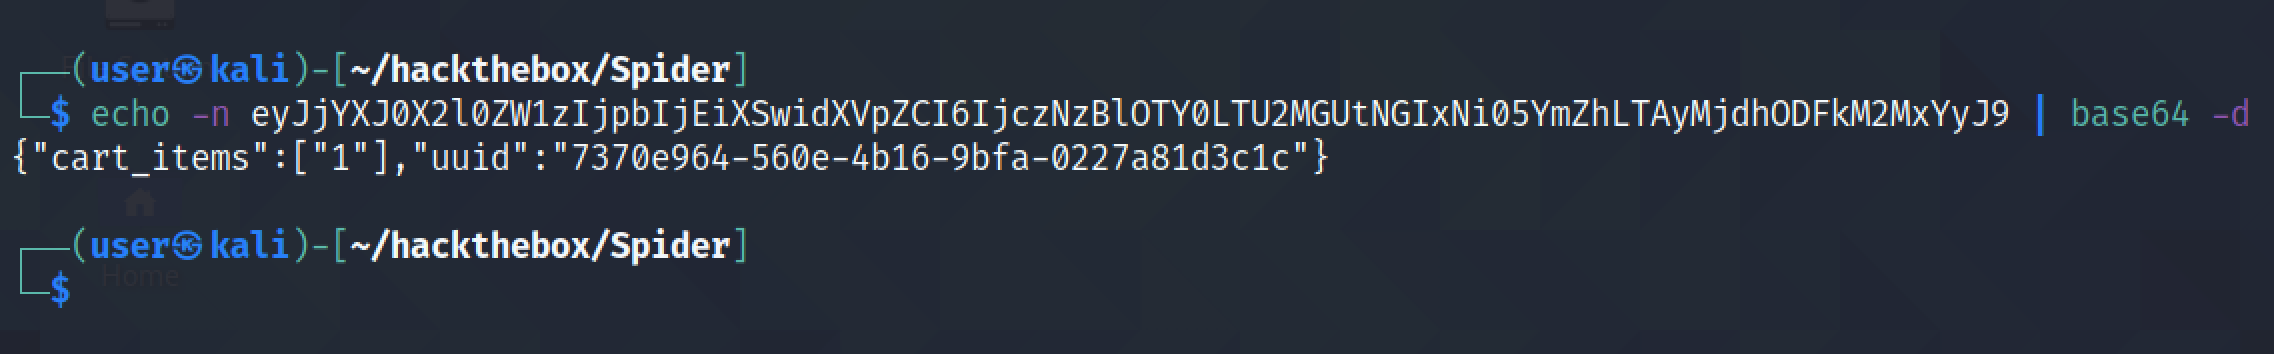 Base64 decoding the cookie.